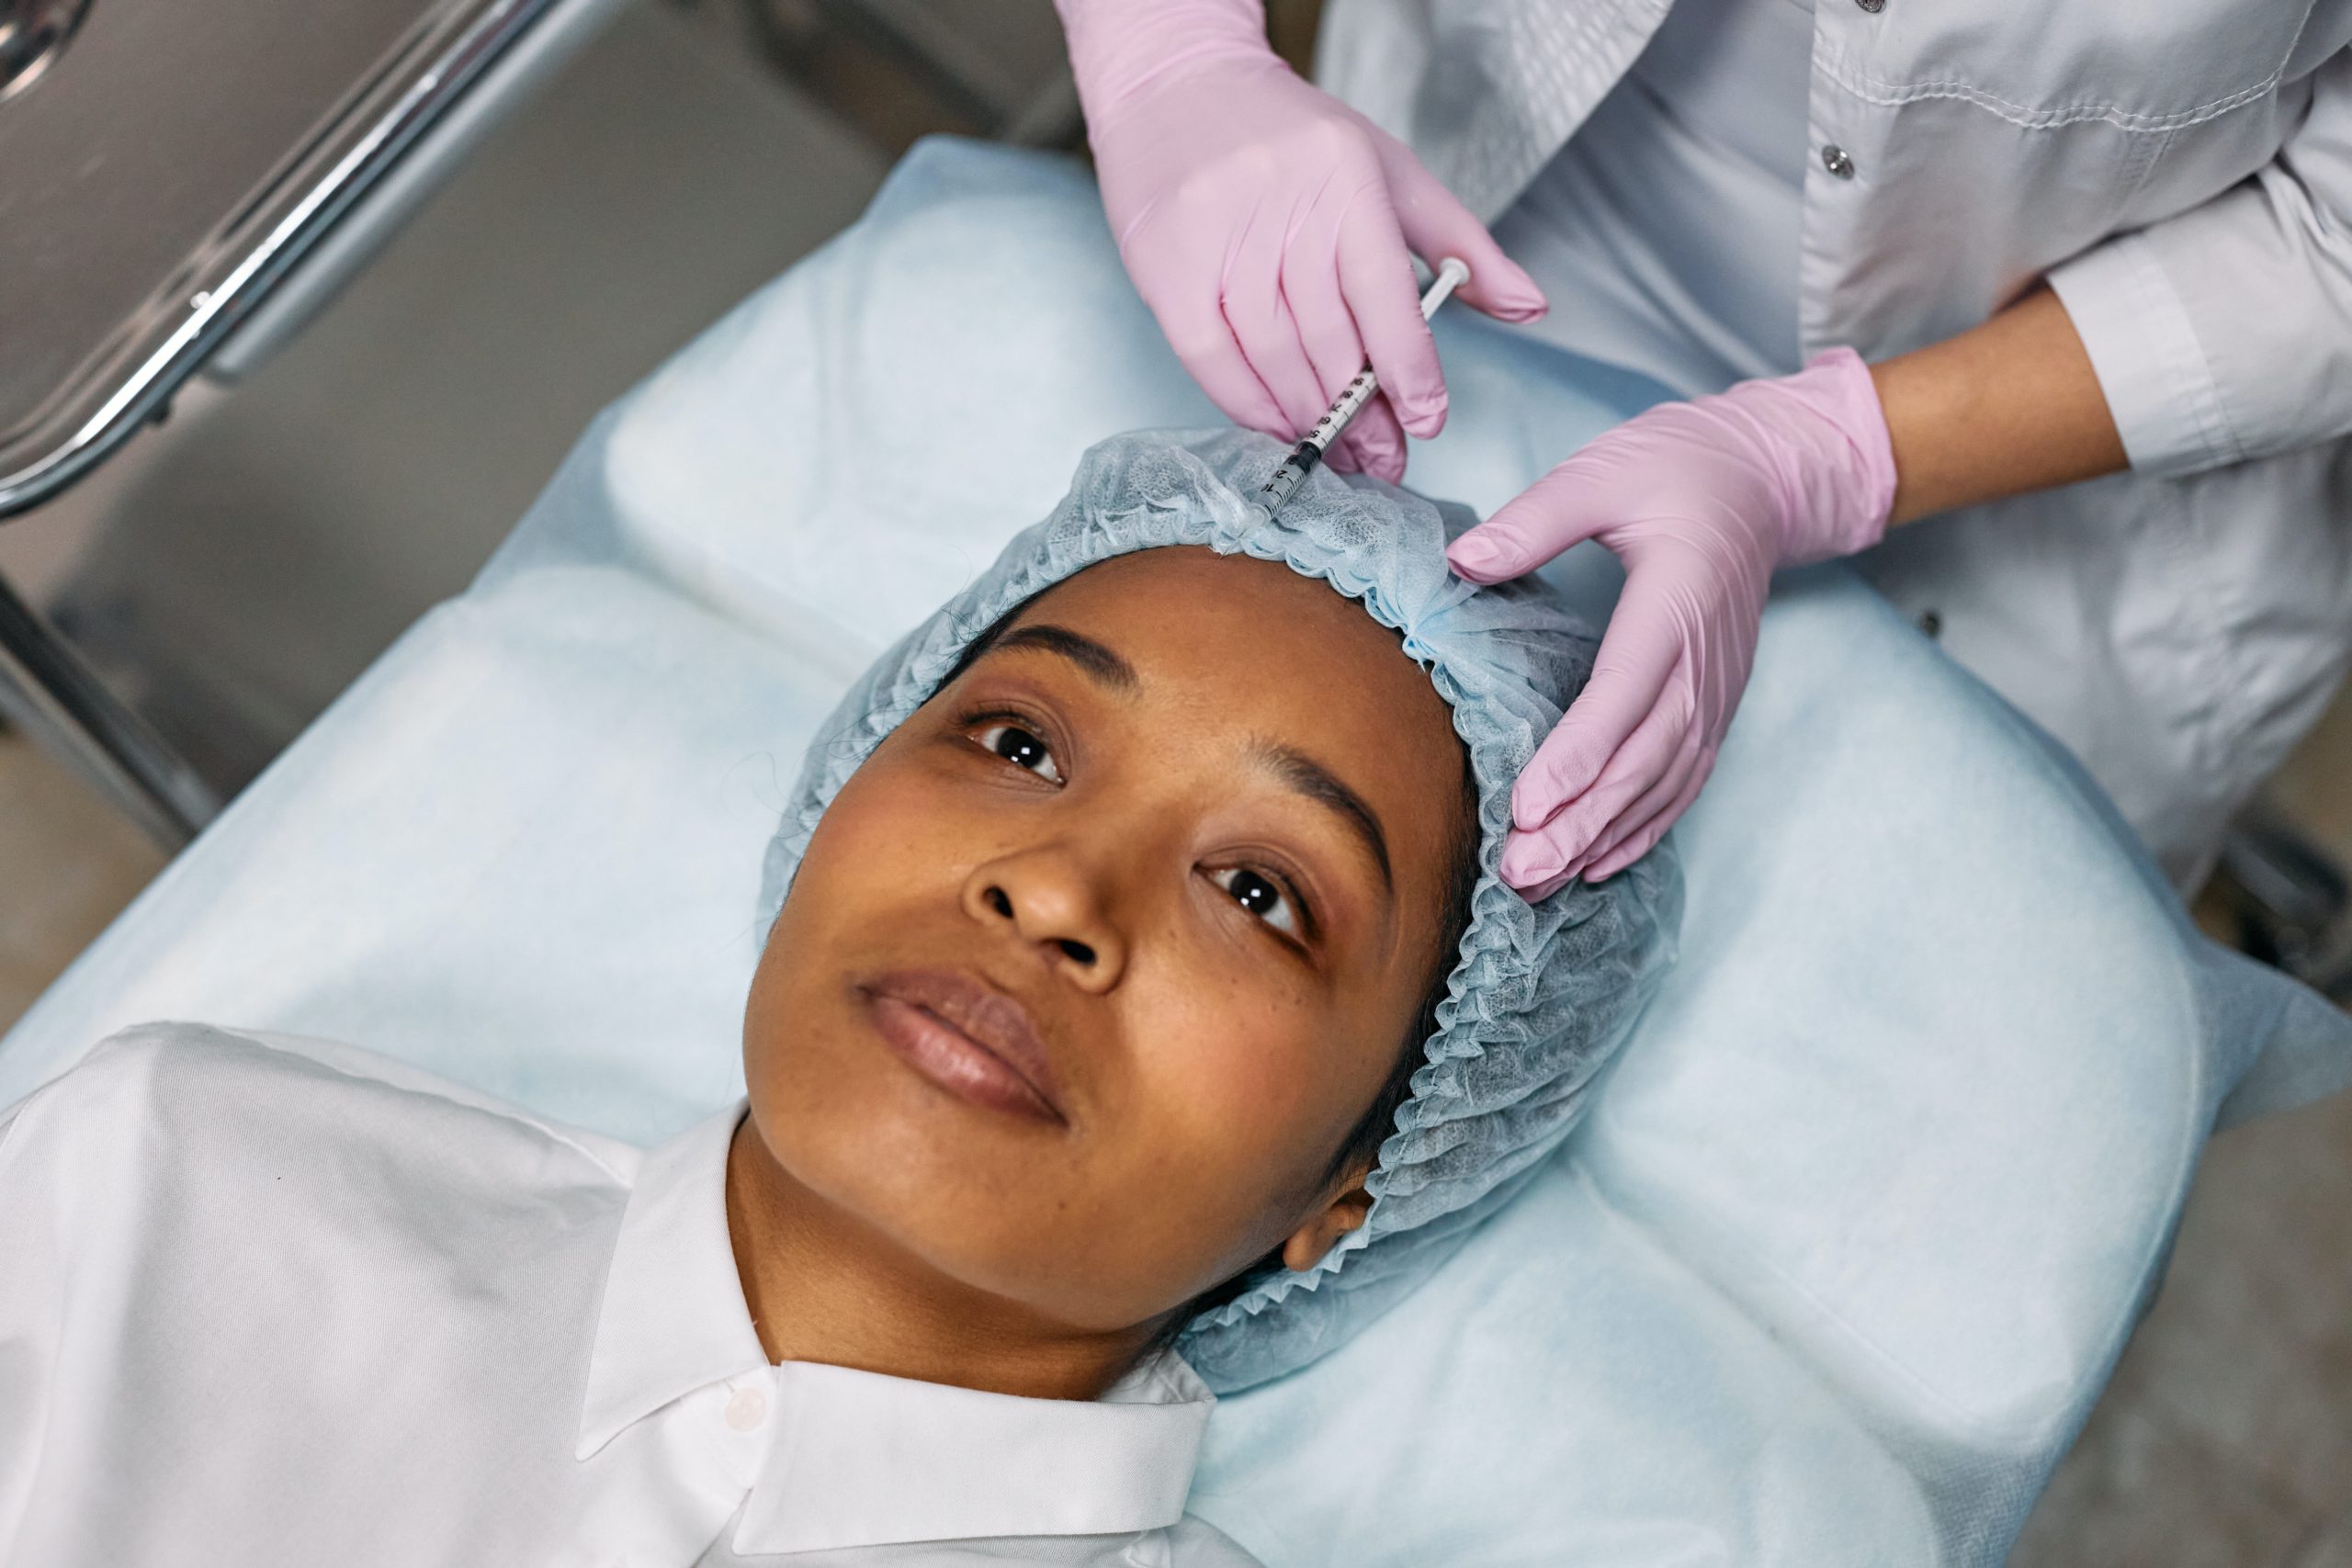 BOTOX: Things to be Careful of Before and After the Treatment